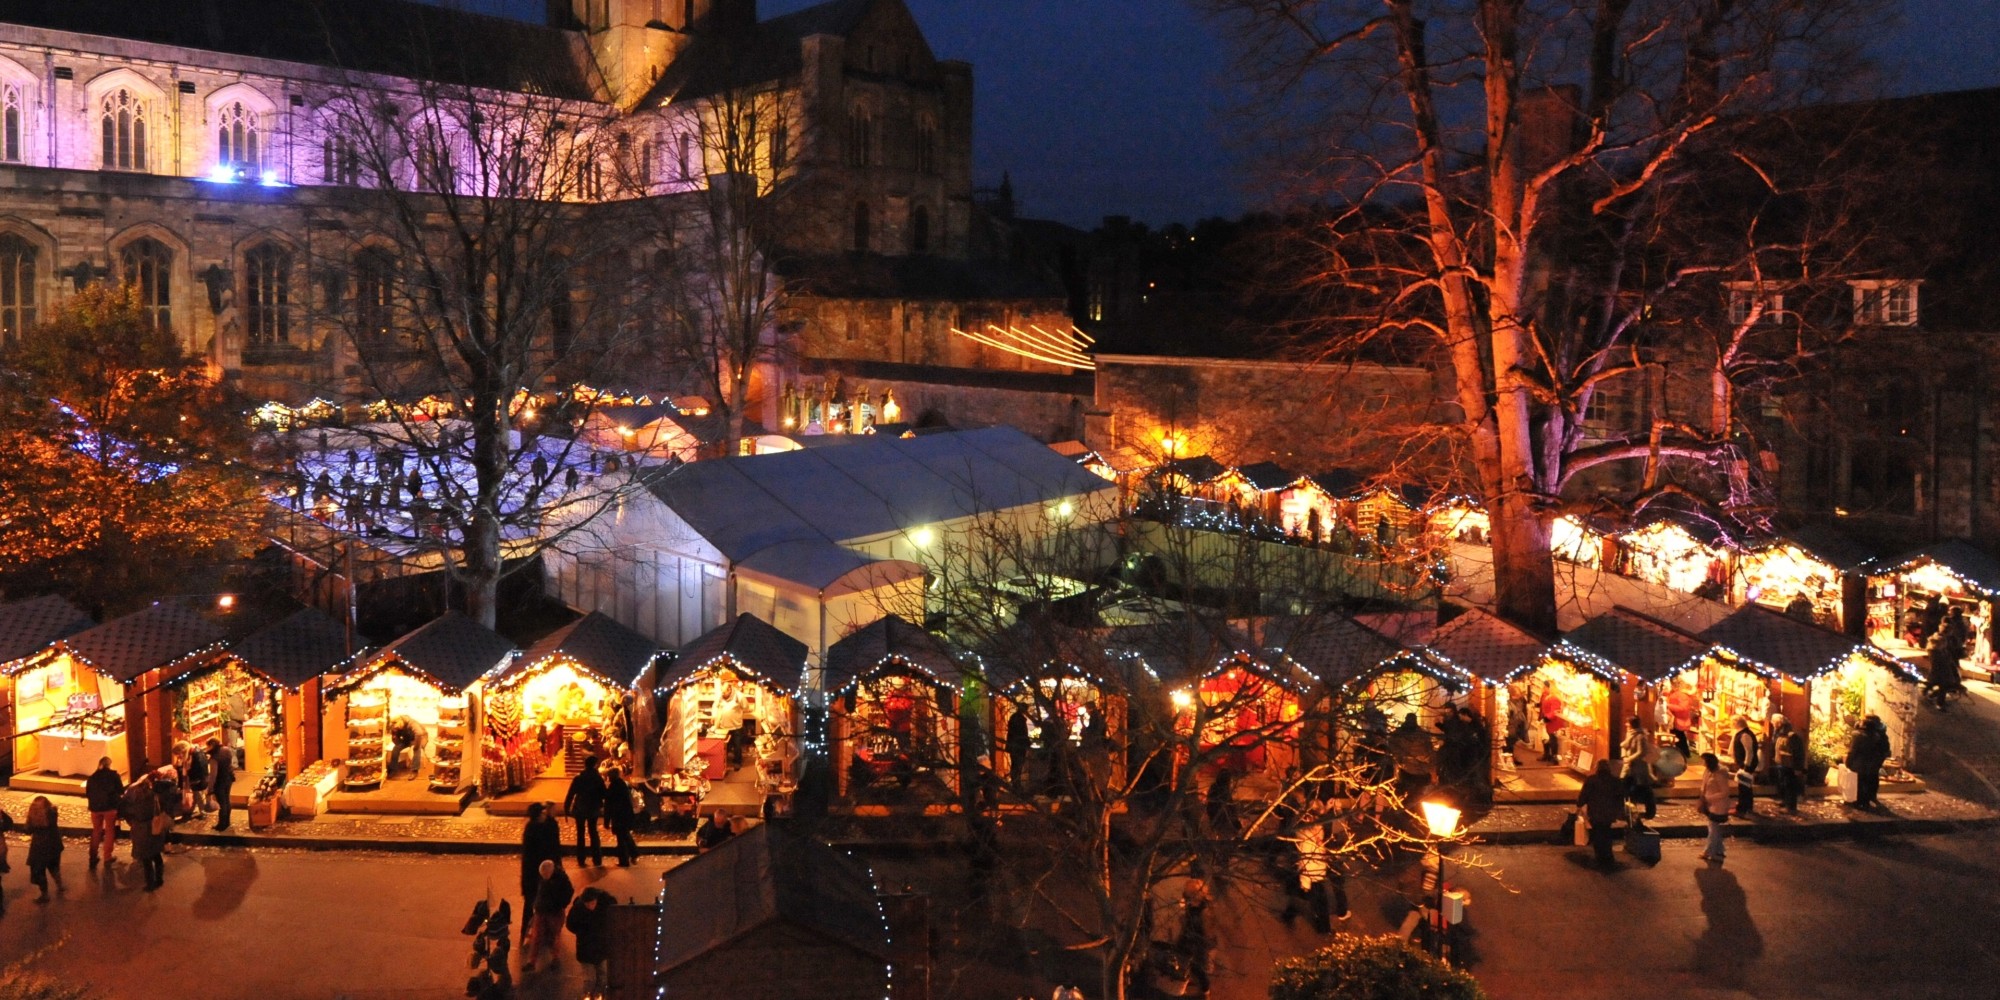 The Best Christmas Markets In The UK & Europe